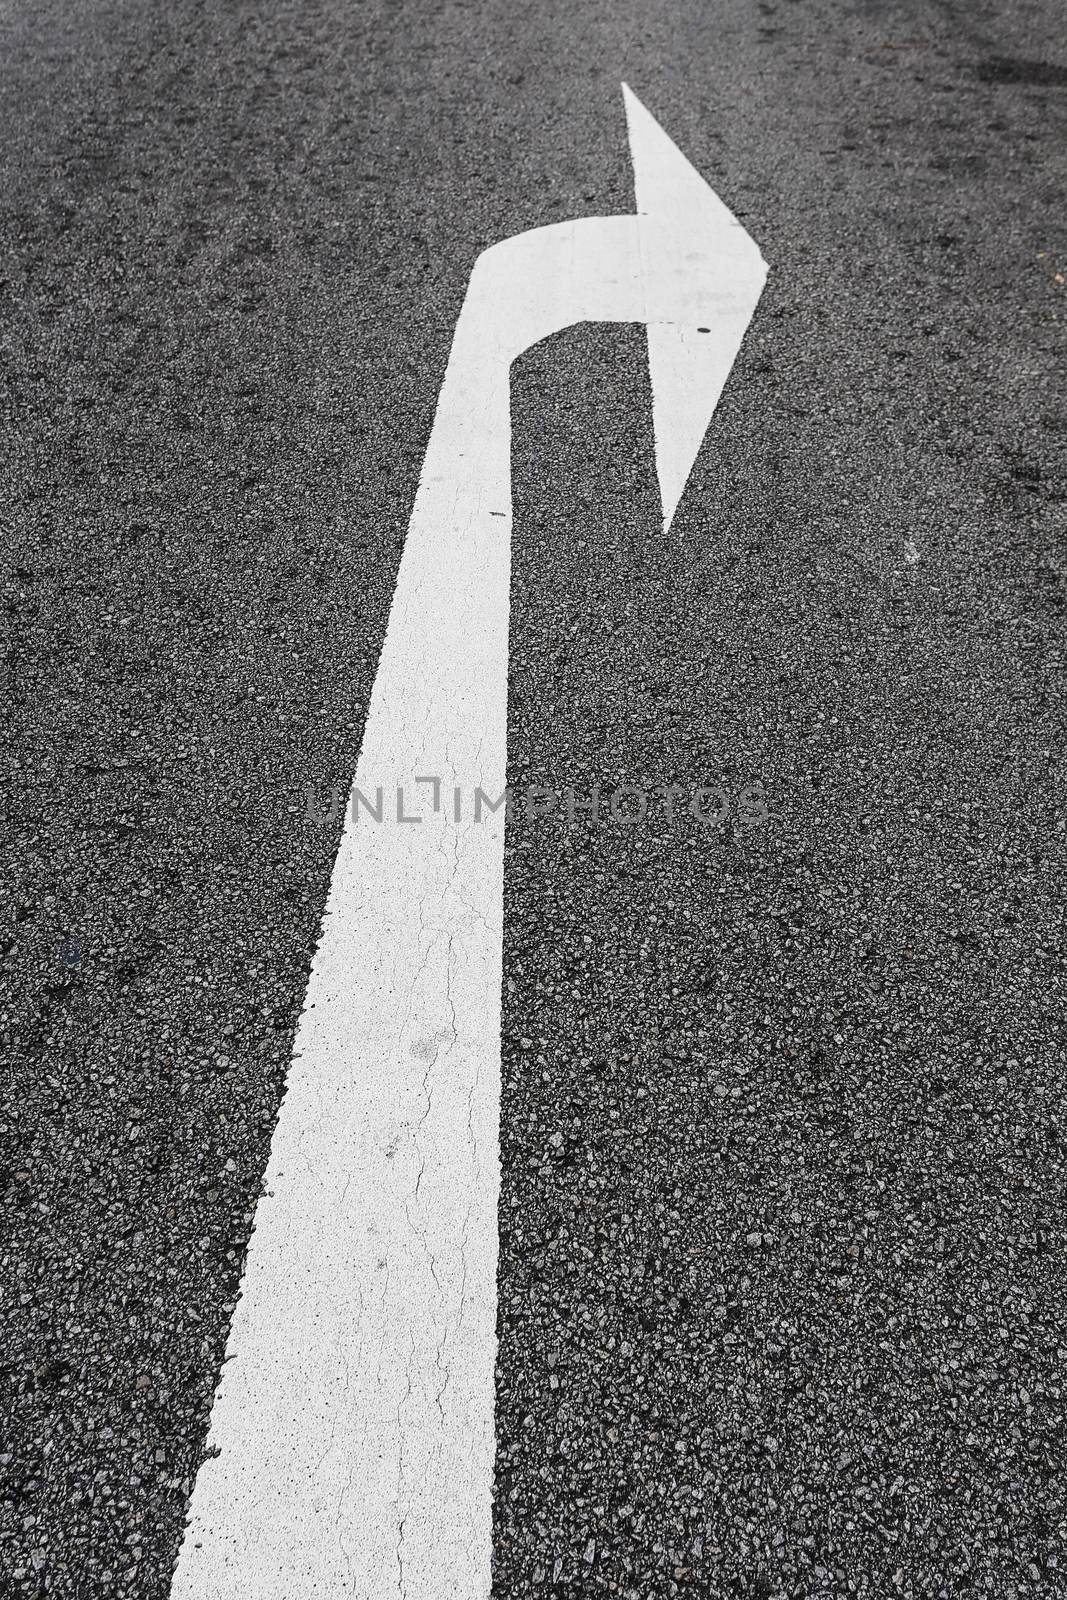 Arrow direction on the road